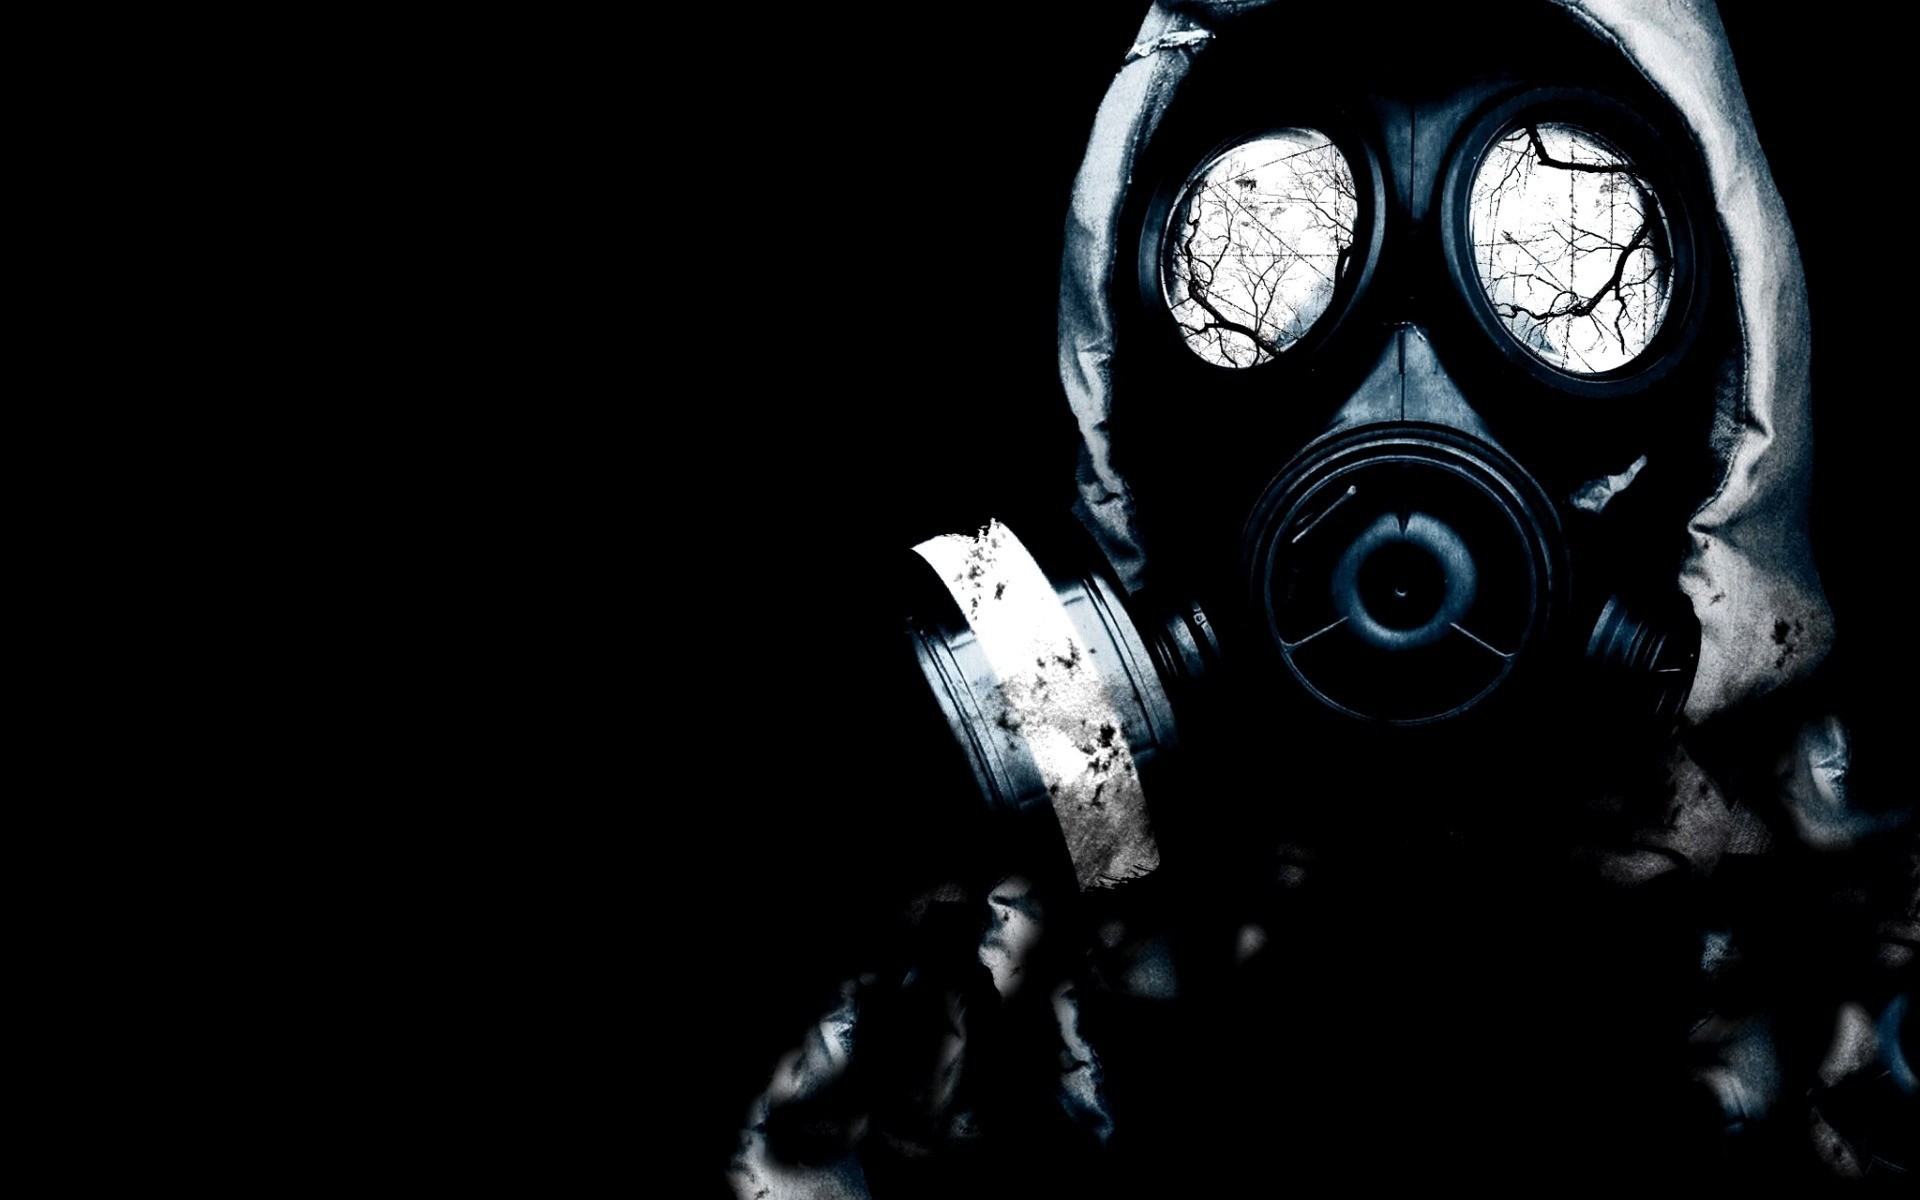 1920x1200 Search Results for “cool gas mask wallpaper” – Adorable Wallpapers